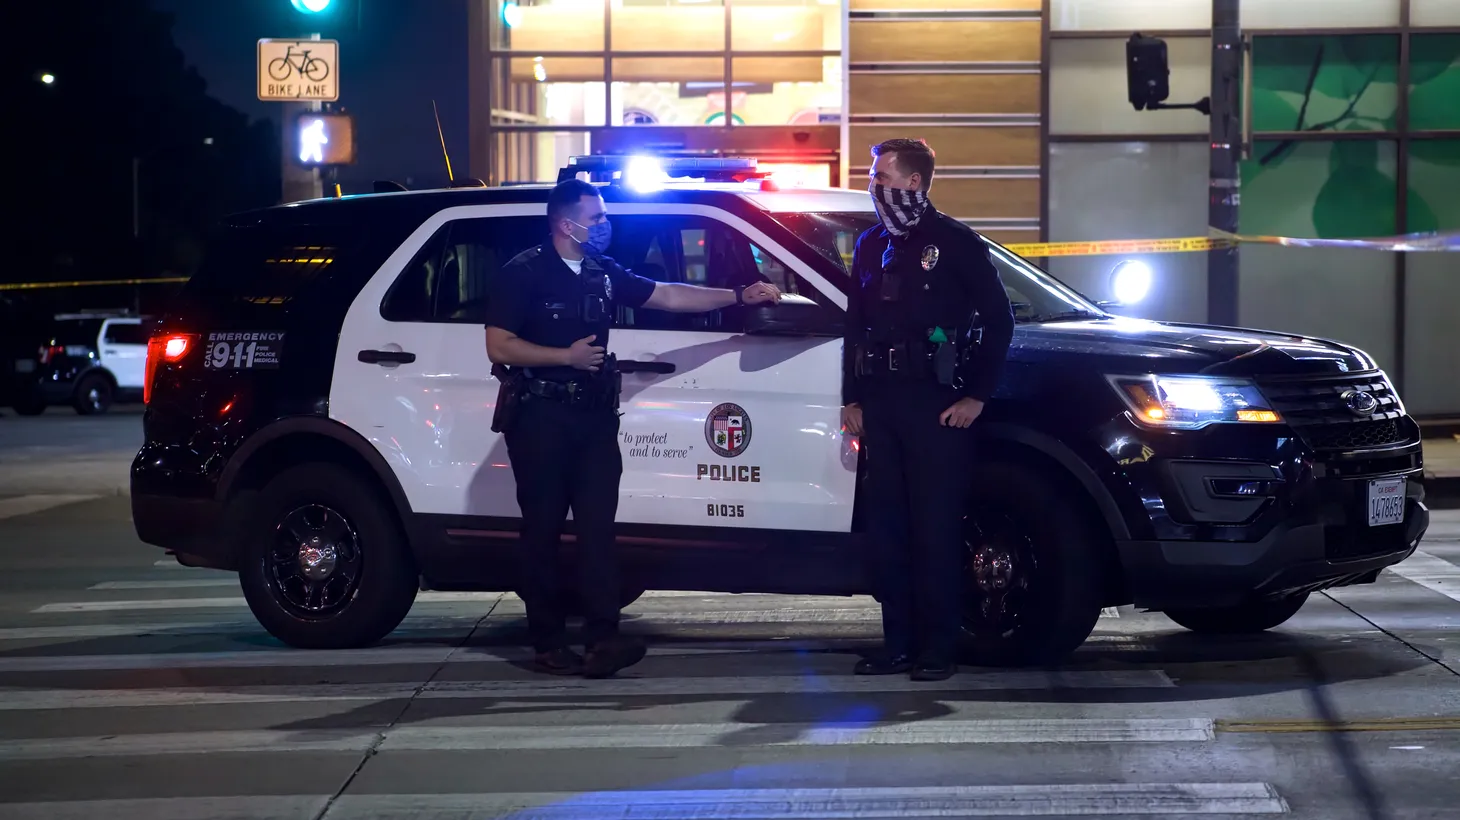 LAPD officers guard Sunset Blvd. in West Hollywood following an officer-involved shooting, April 24, 2021.